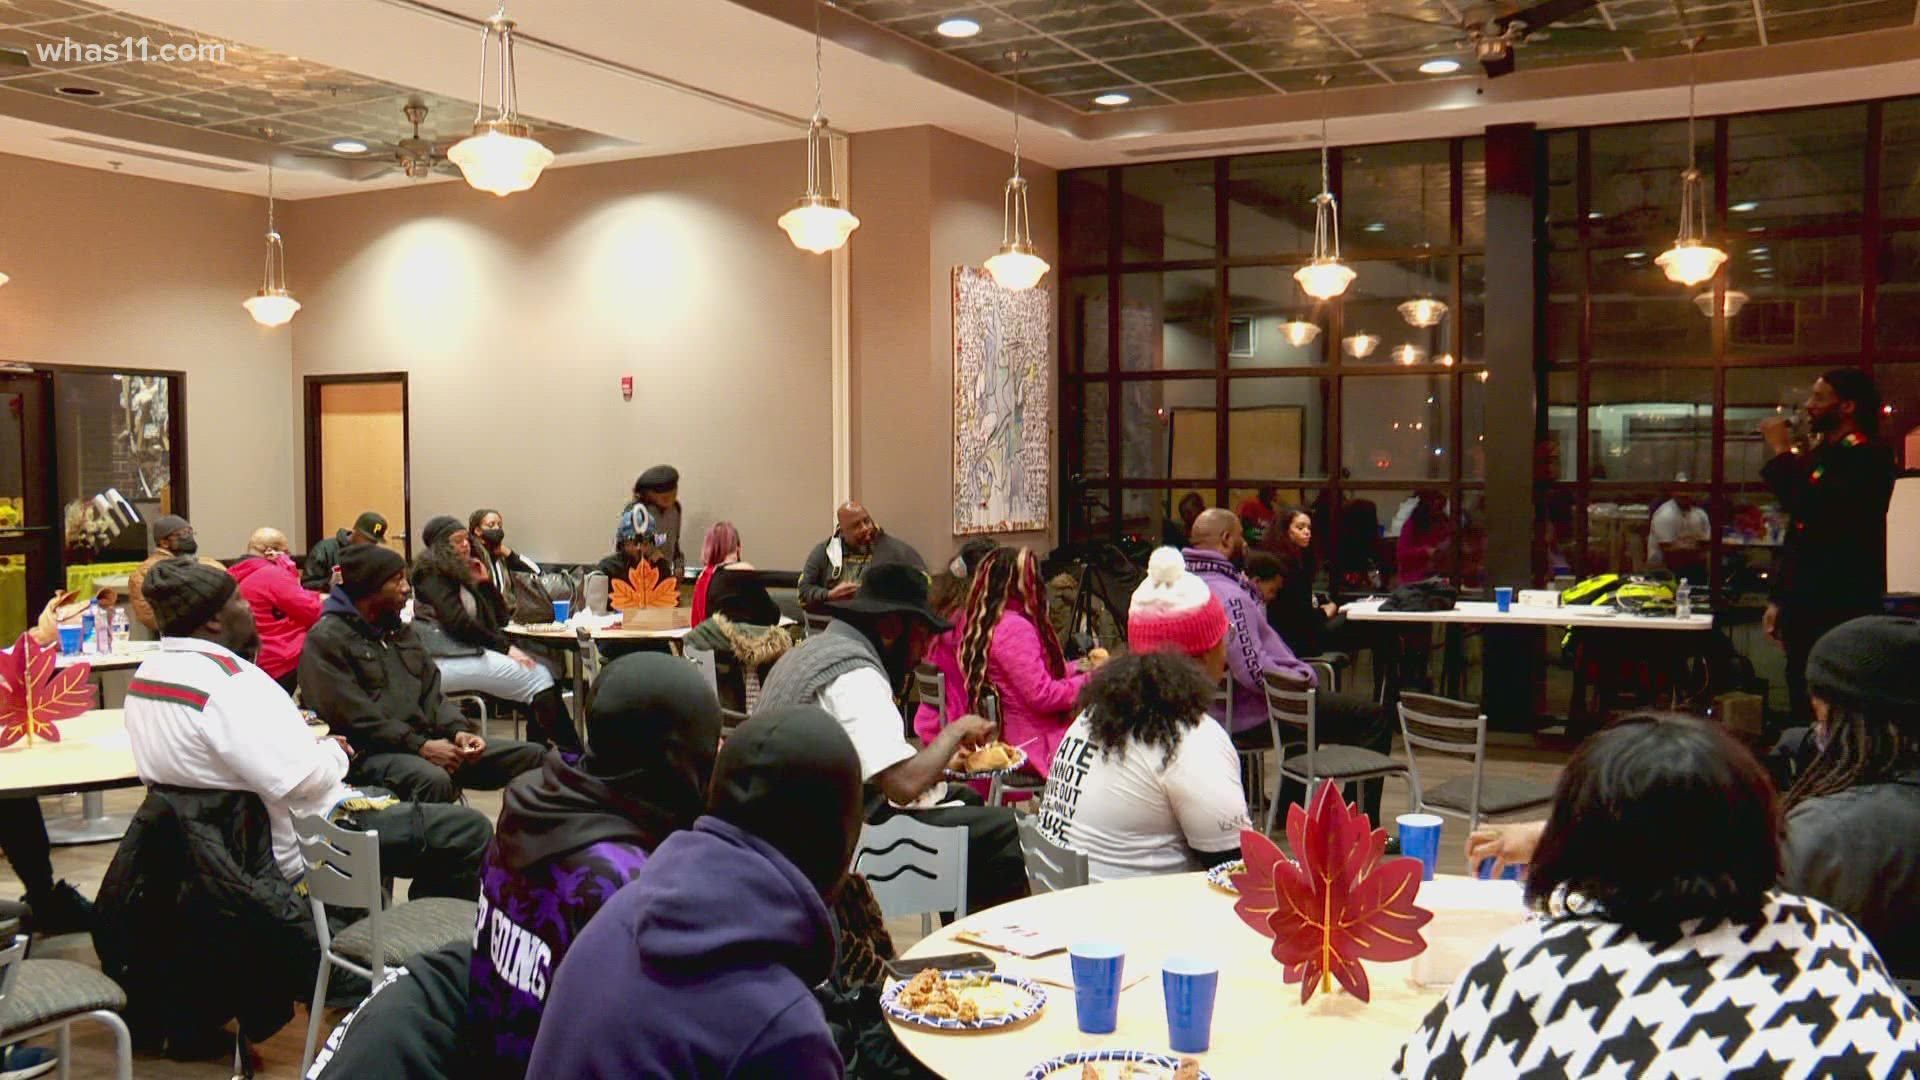 The groups Men Against Violence, X-Hate, Ten Good Men, and Shock Therapy joined together to host the dinner and panel discussion.